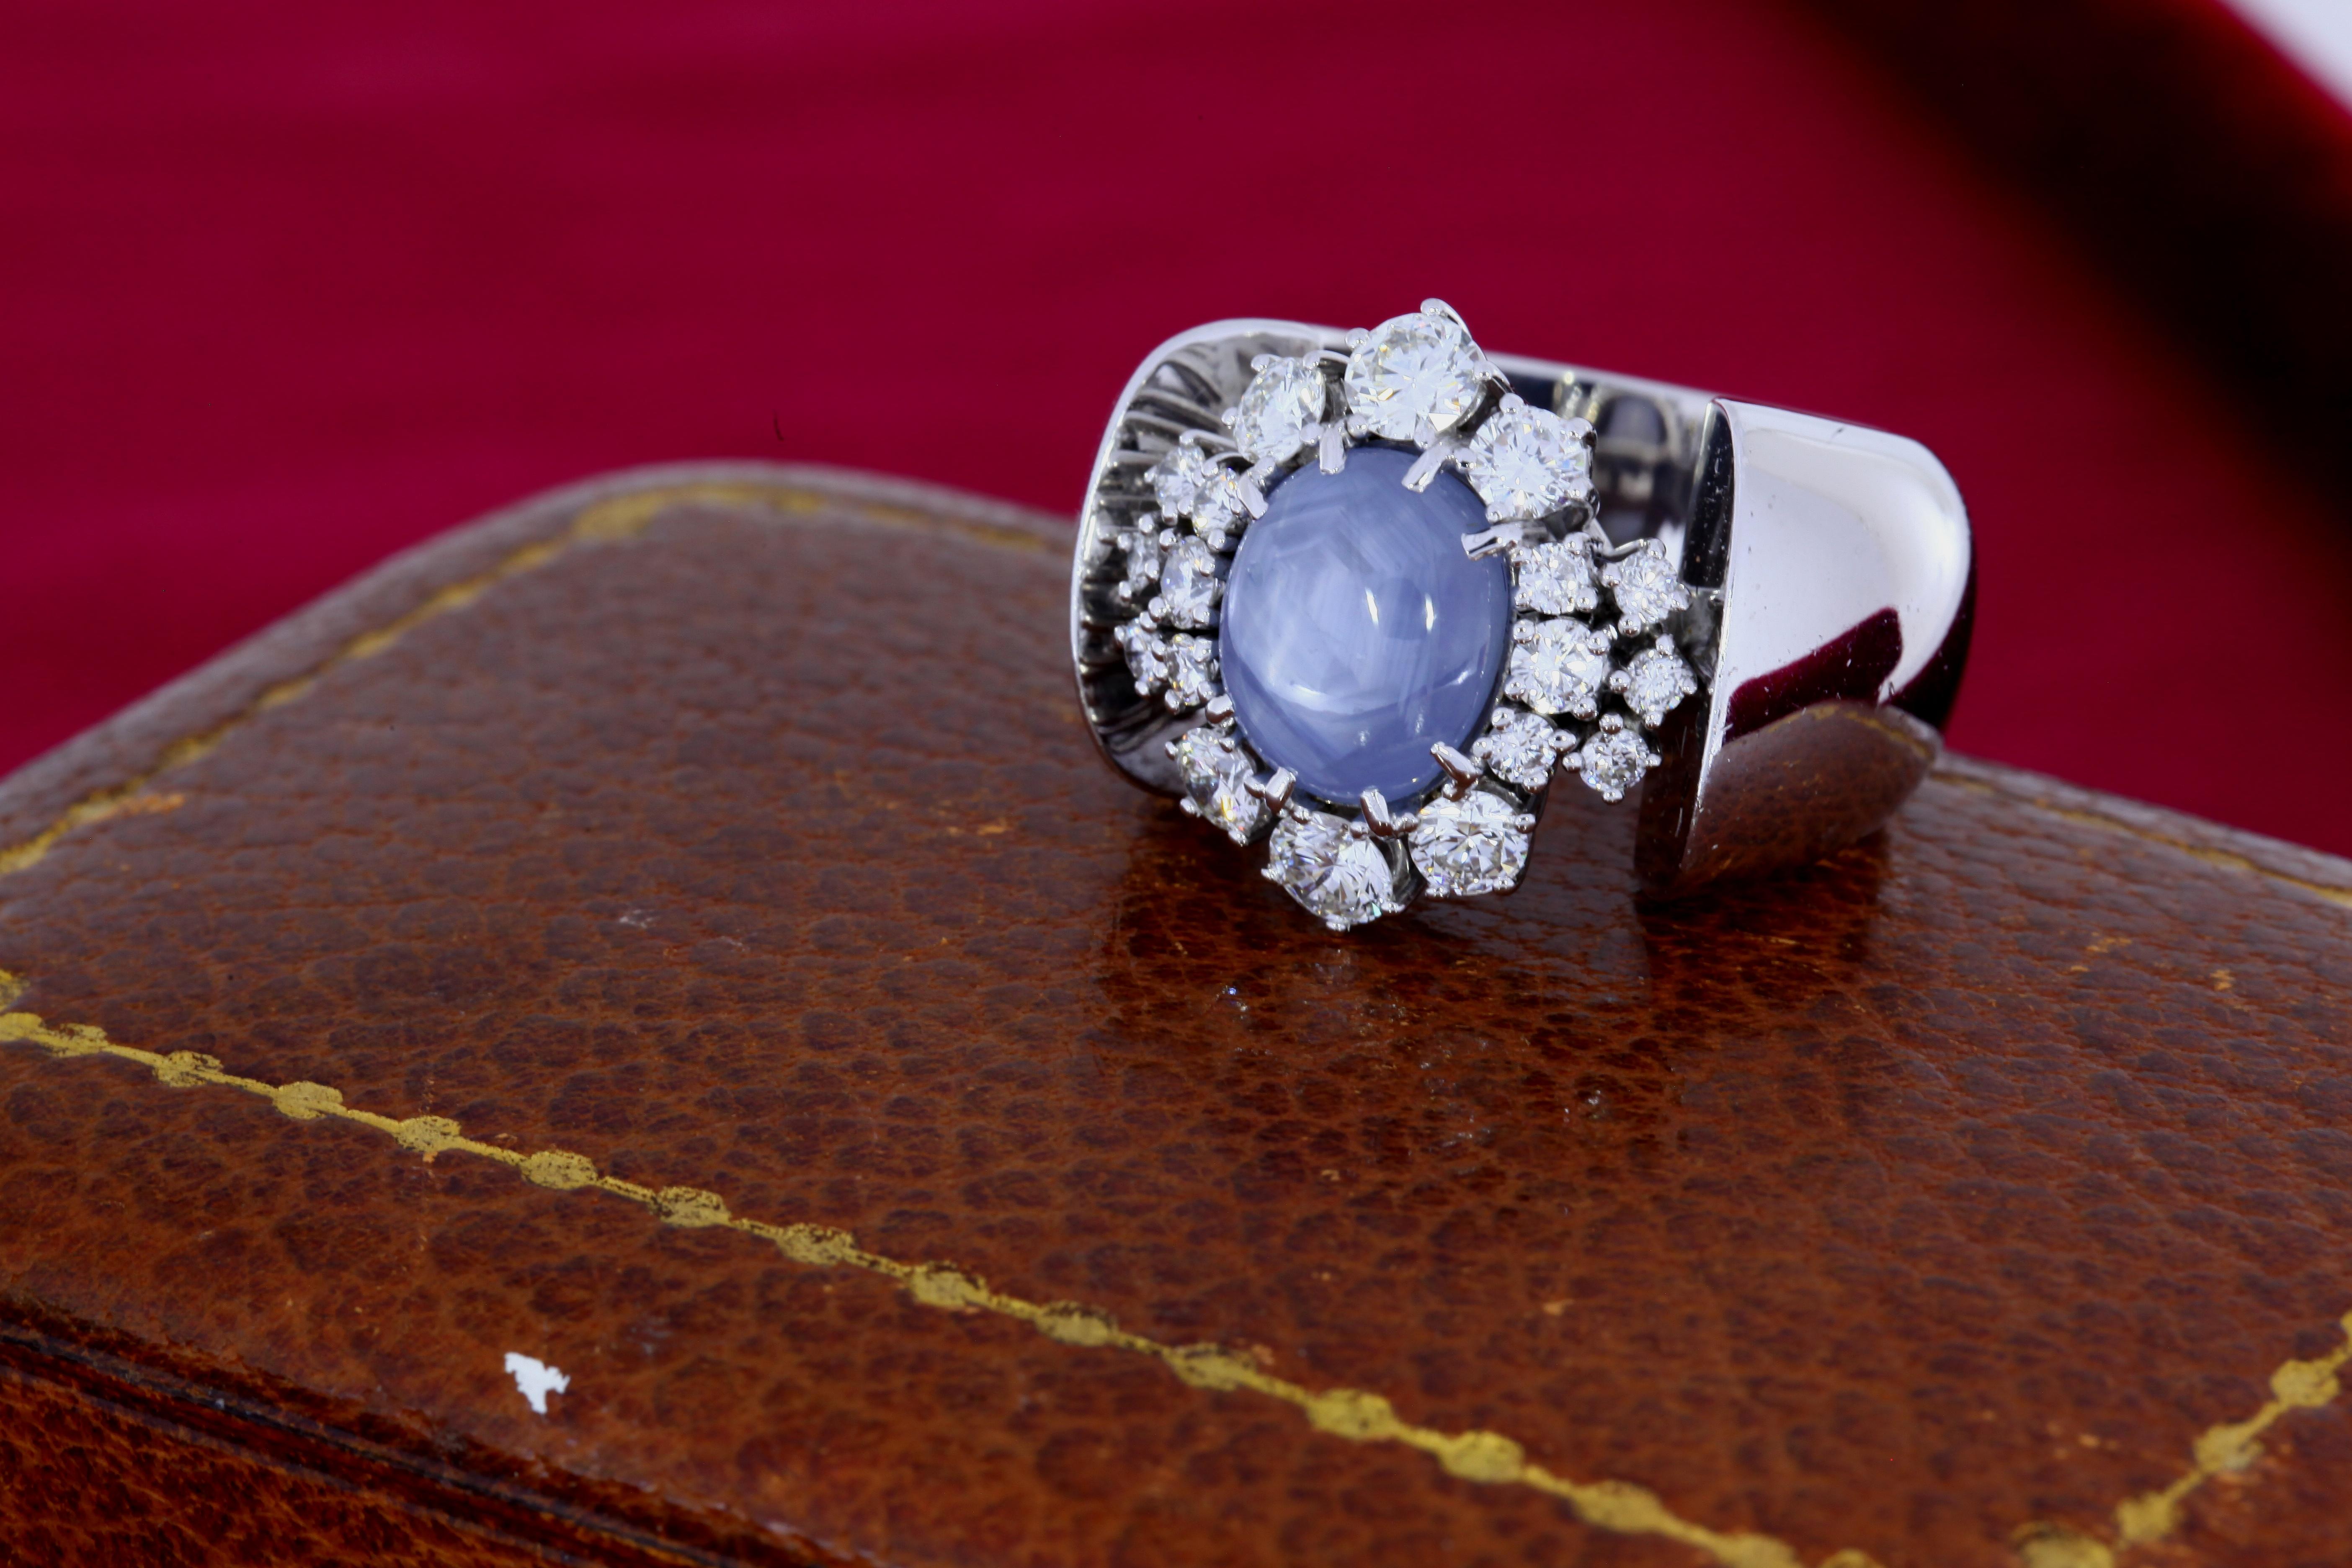 Gray Star Sapphire weighing approximately 7 carats accompanies by 1.5 carats of diamonds in the surrounding cluster set in a platinum ring. 